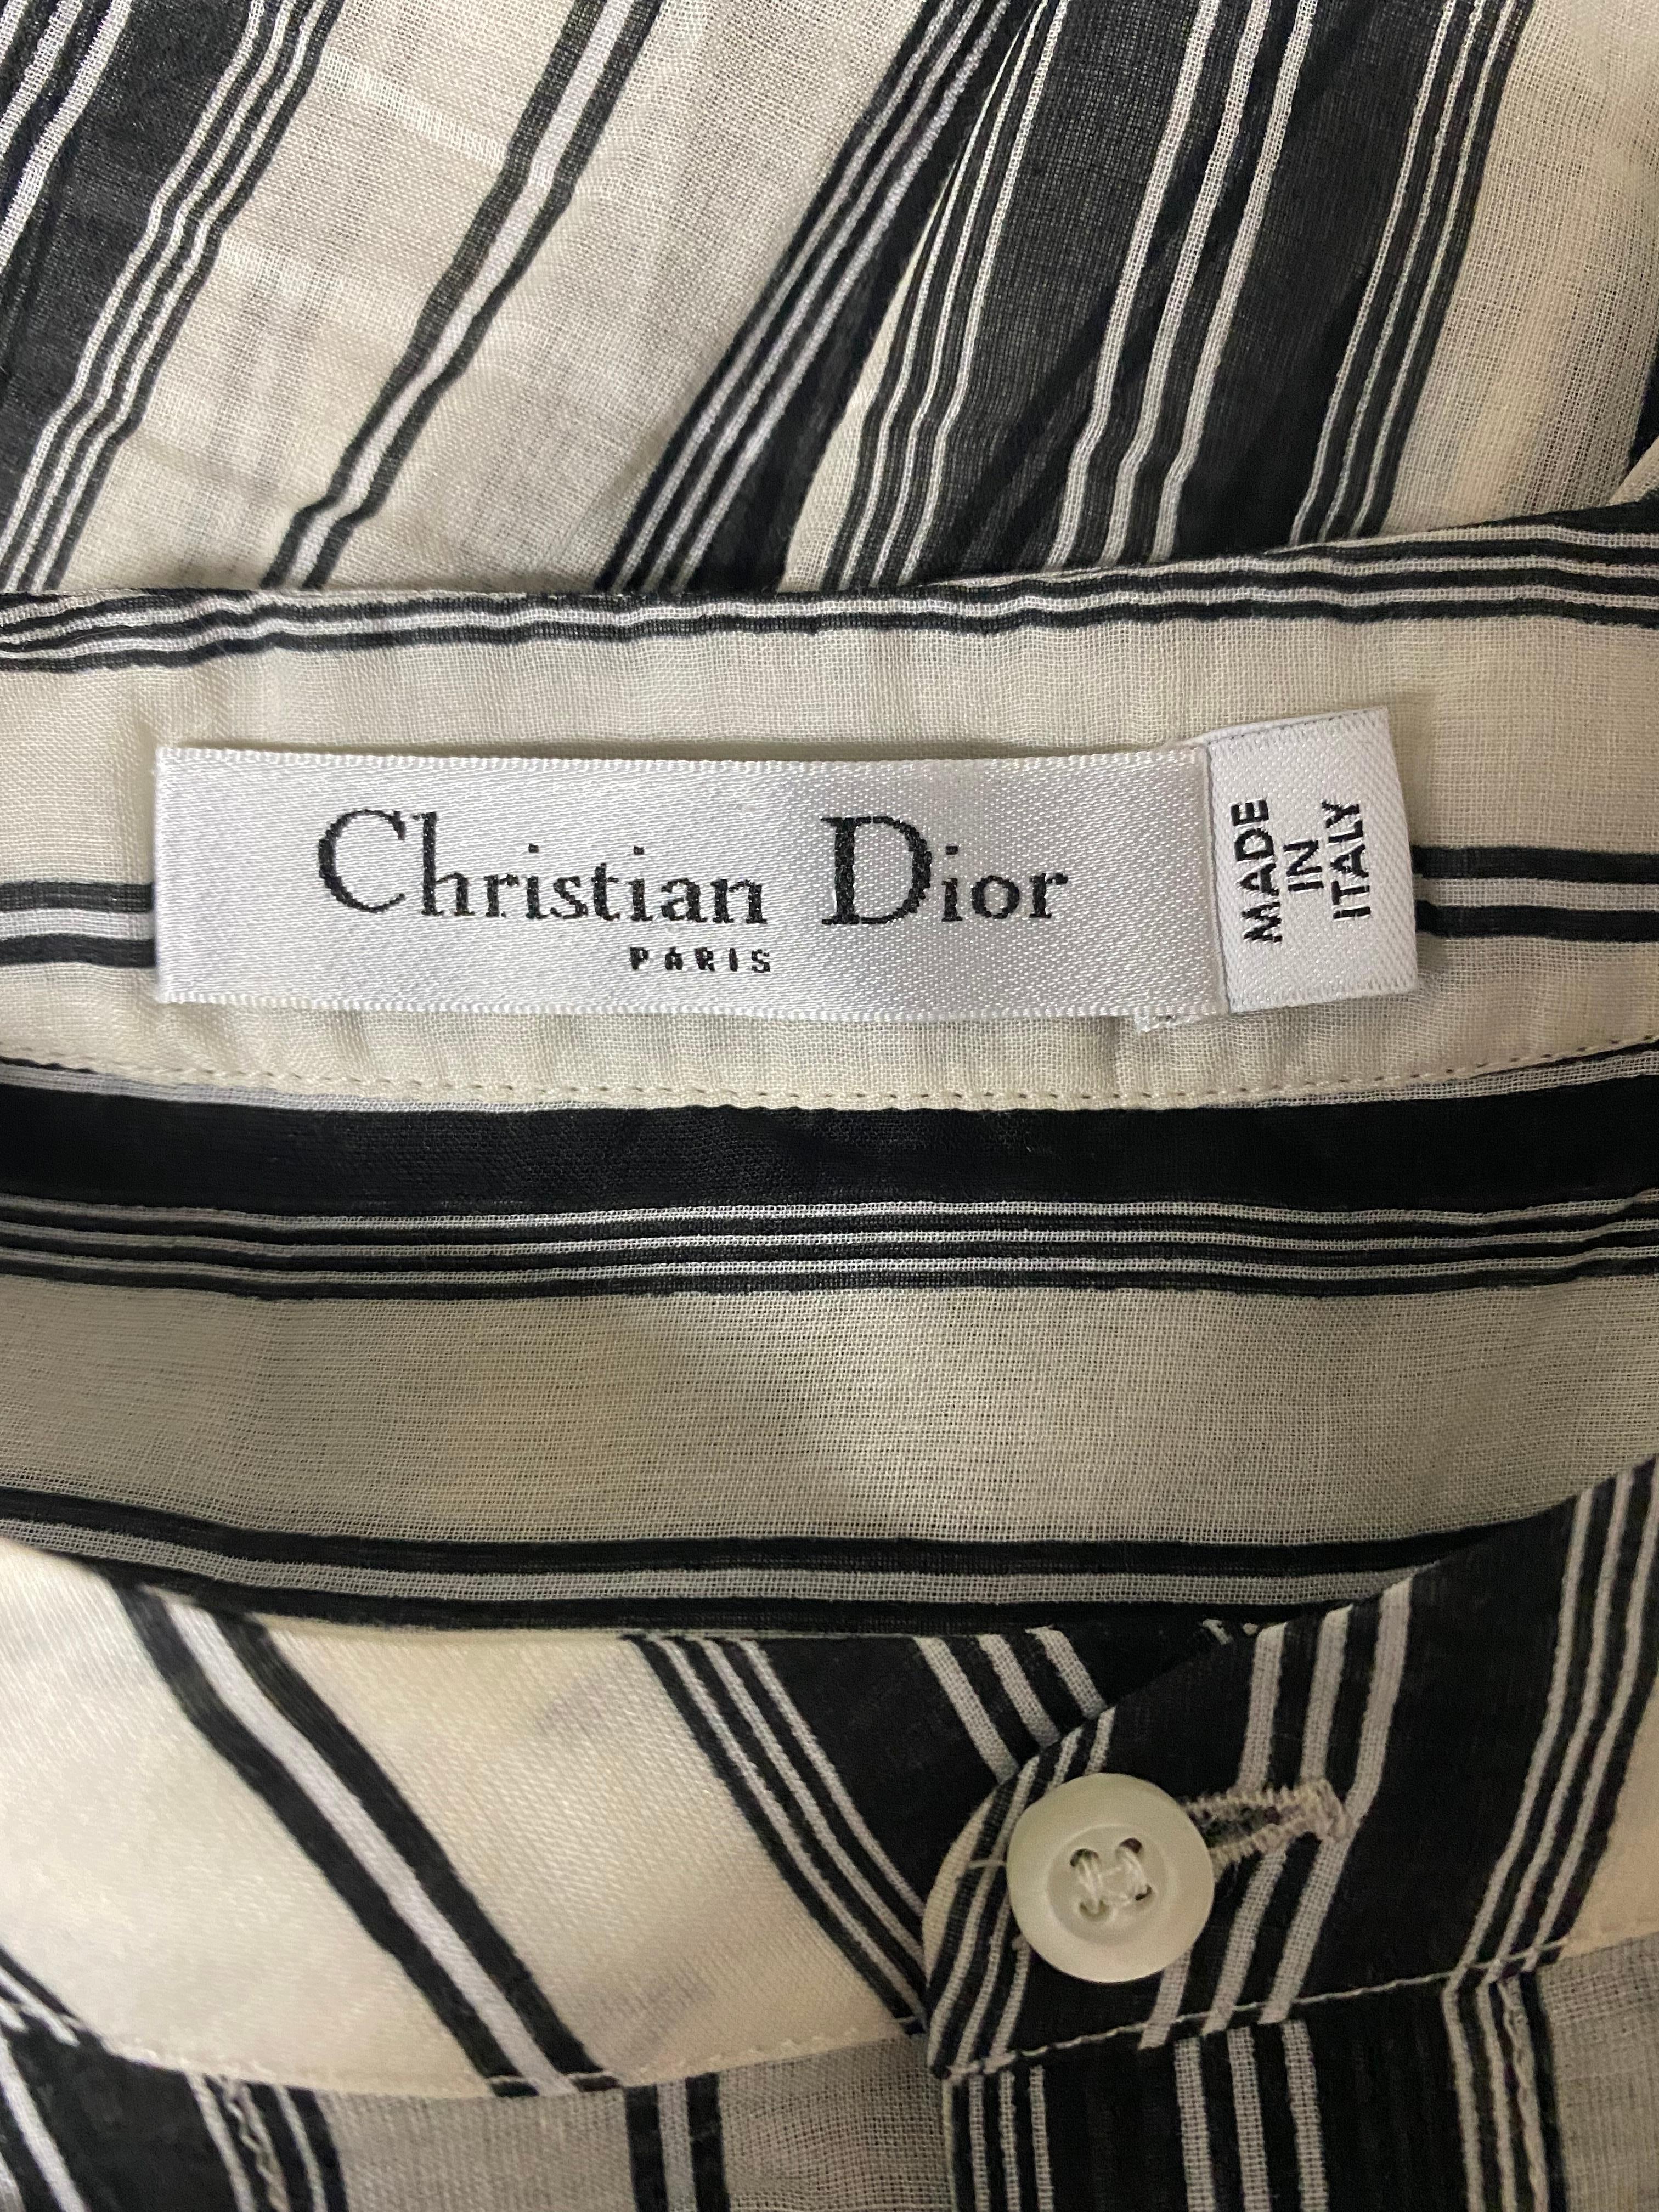 Christian Dior Black and White Blouse Tunic, Size 36 For Sale 1